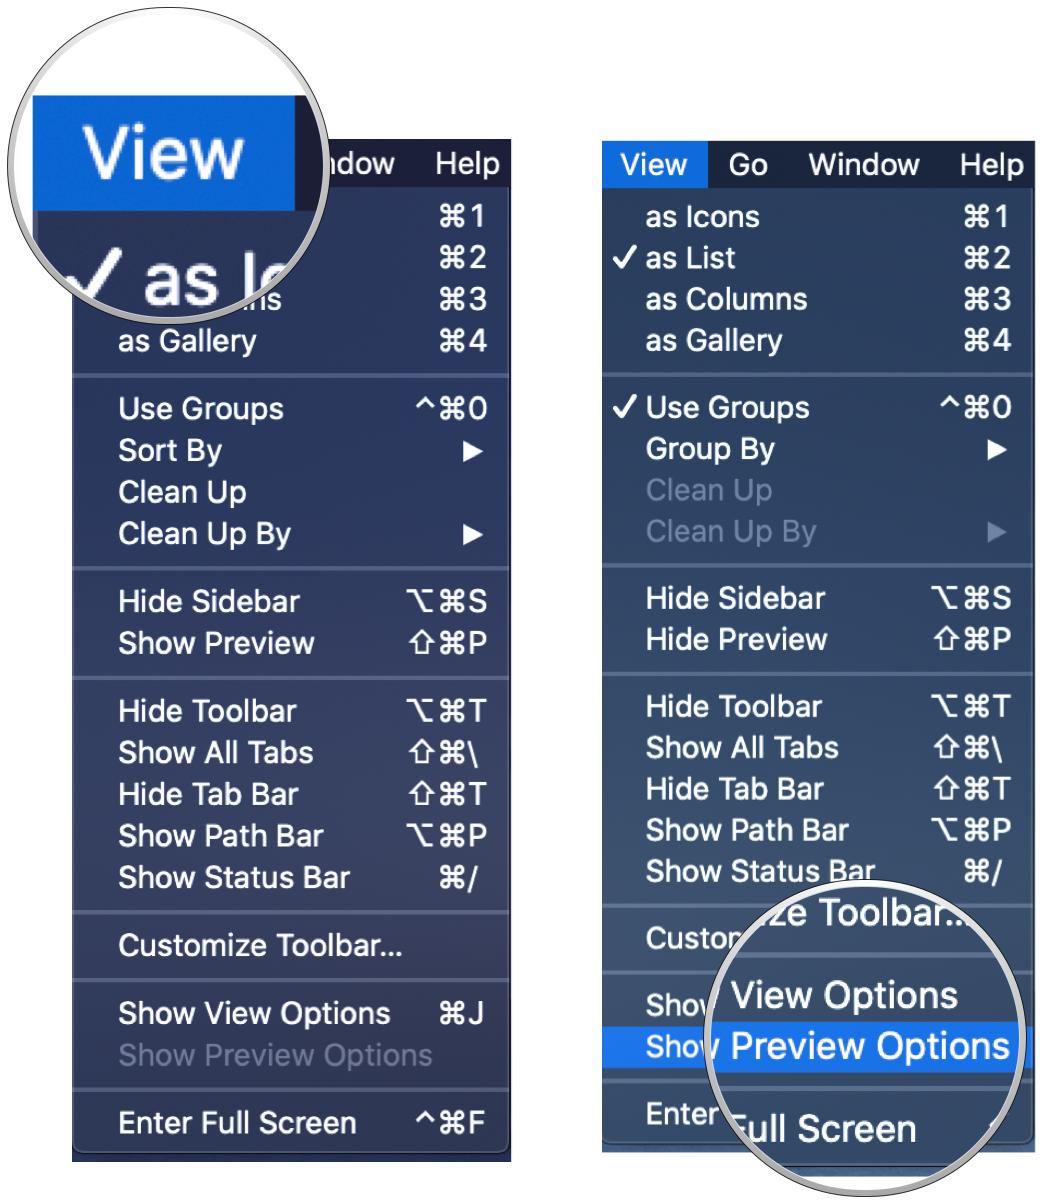 Preview Options